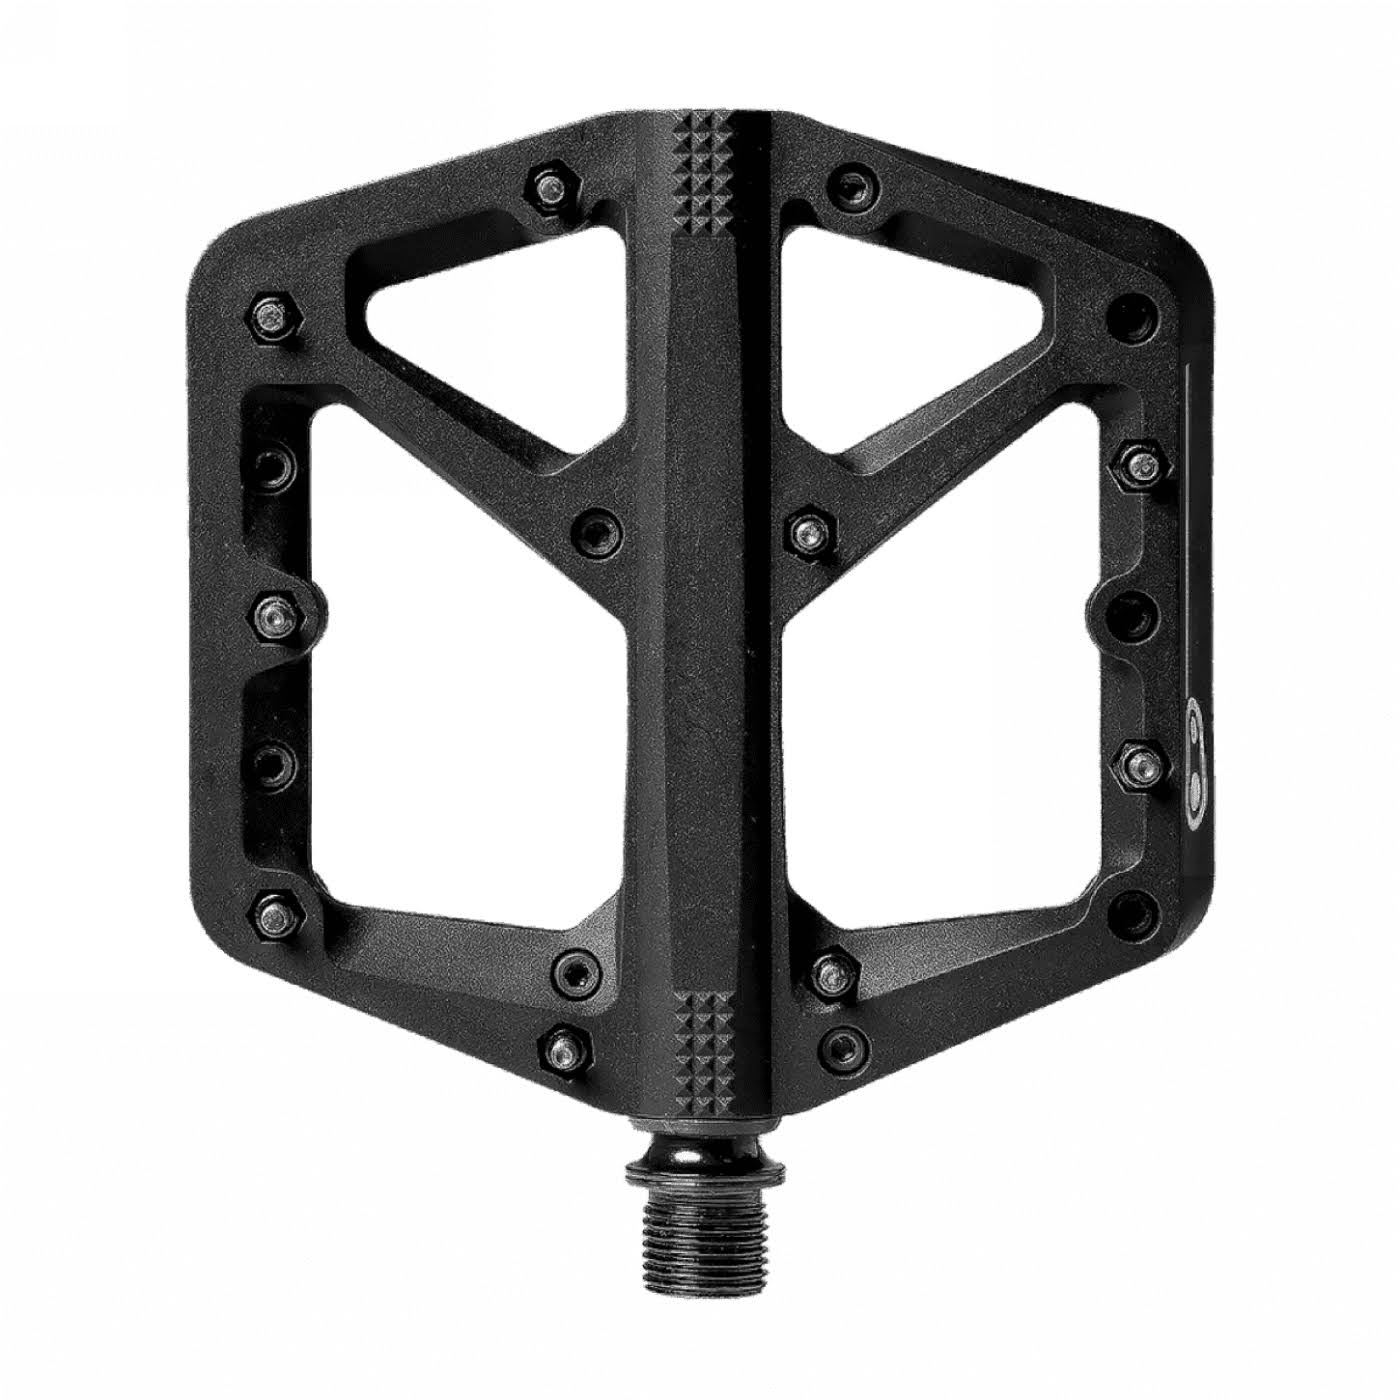 Crank Brothers Stamp Pedals - Black